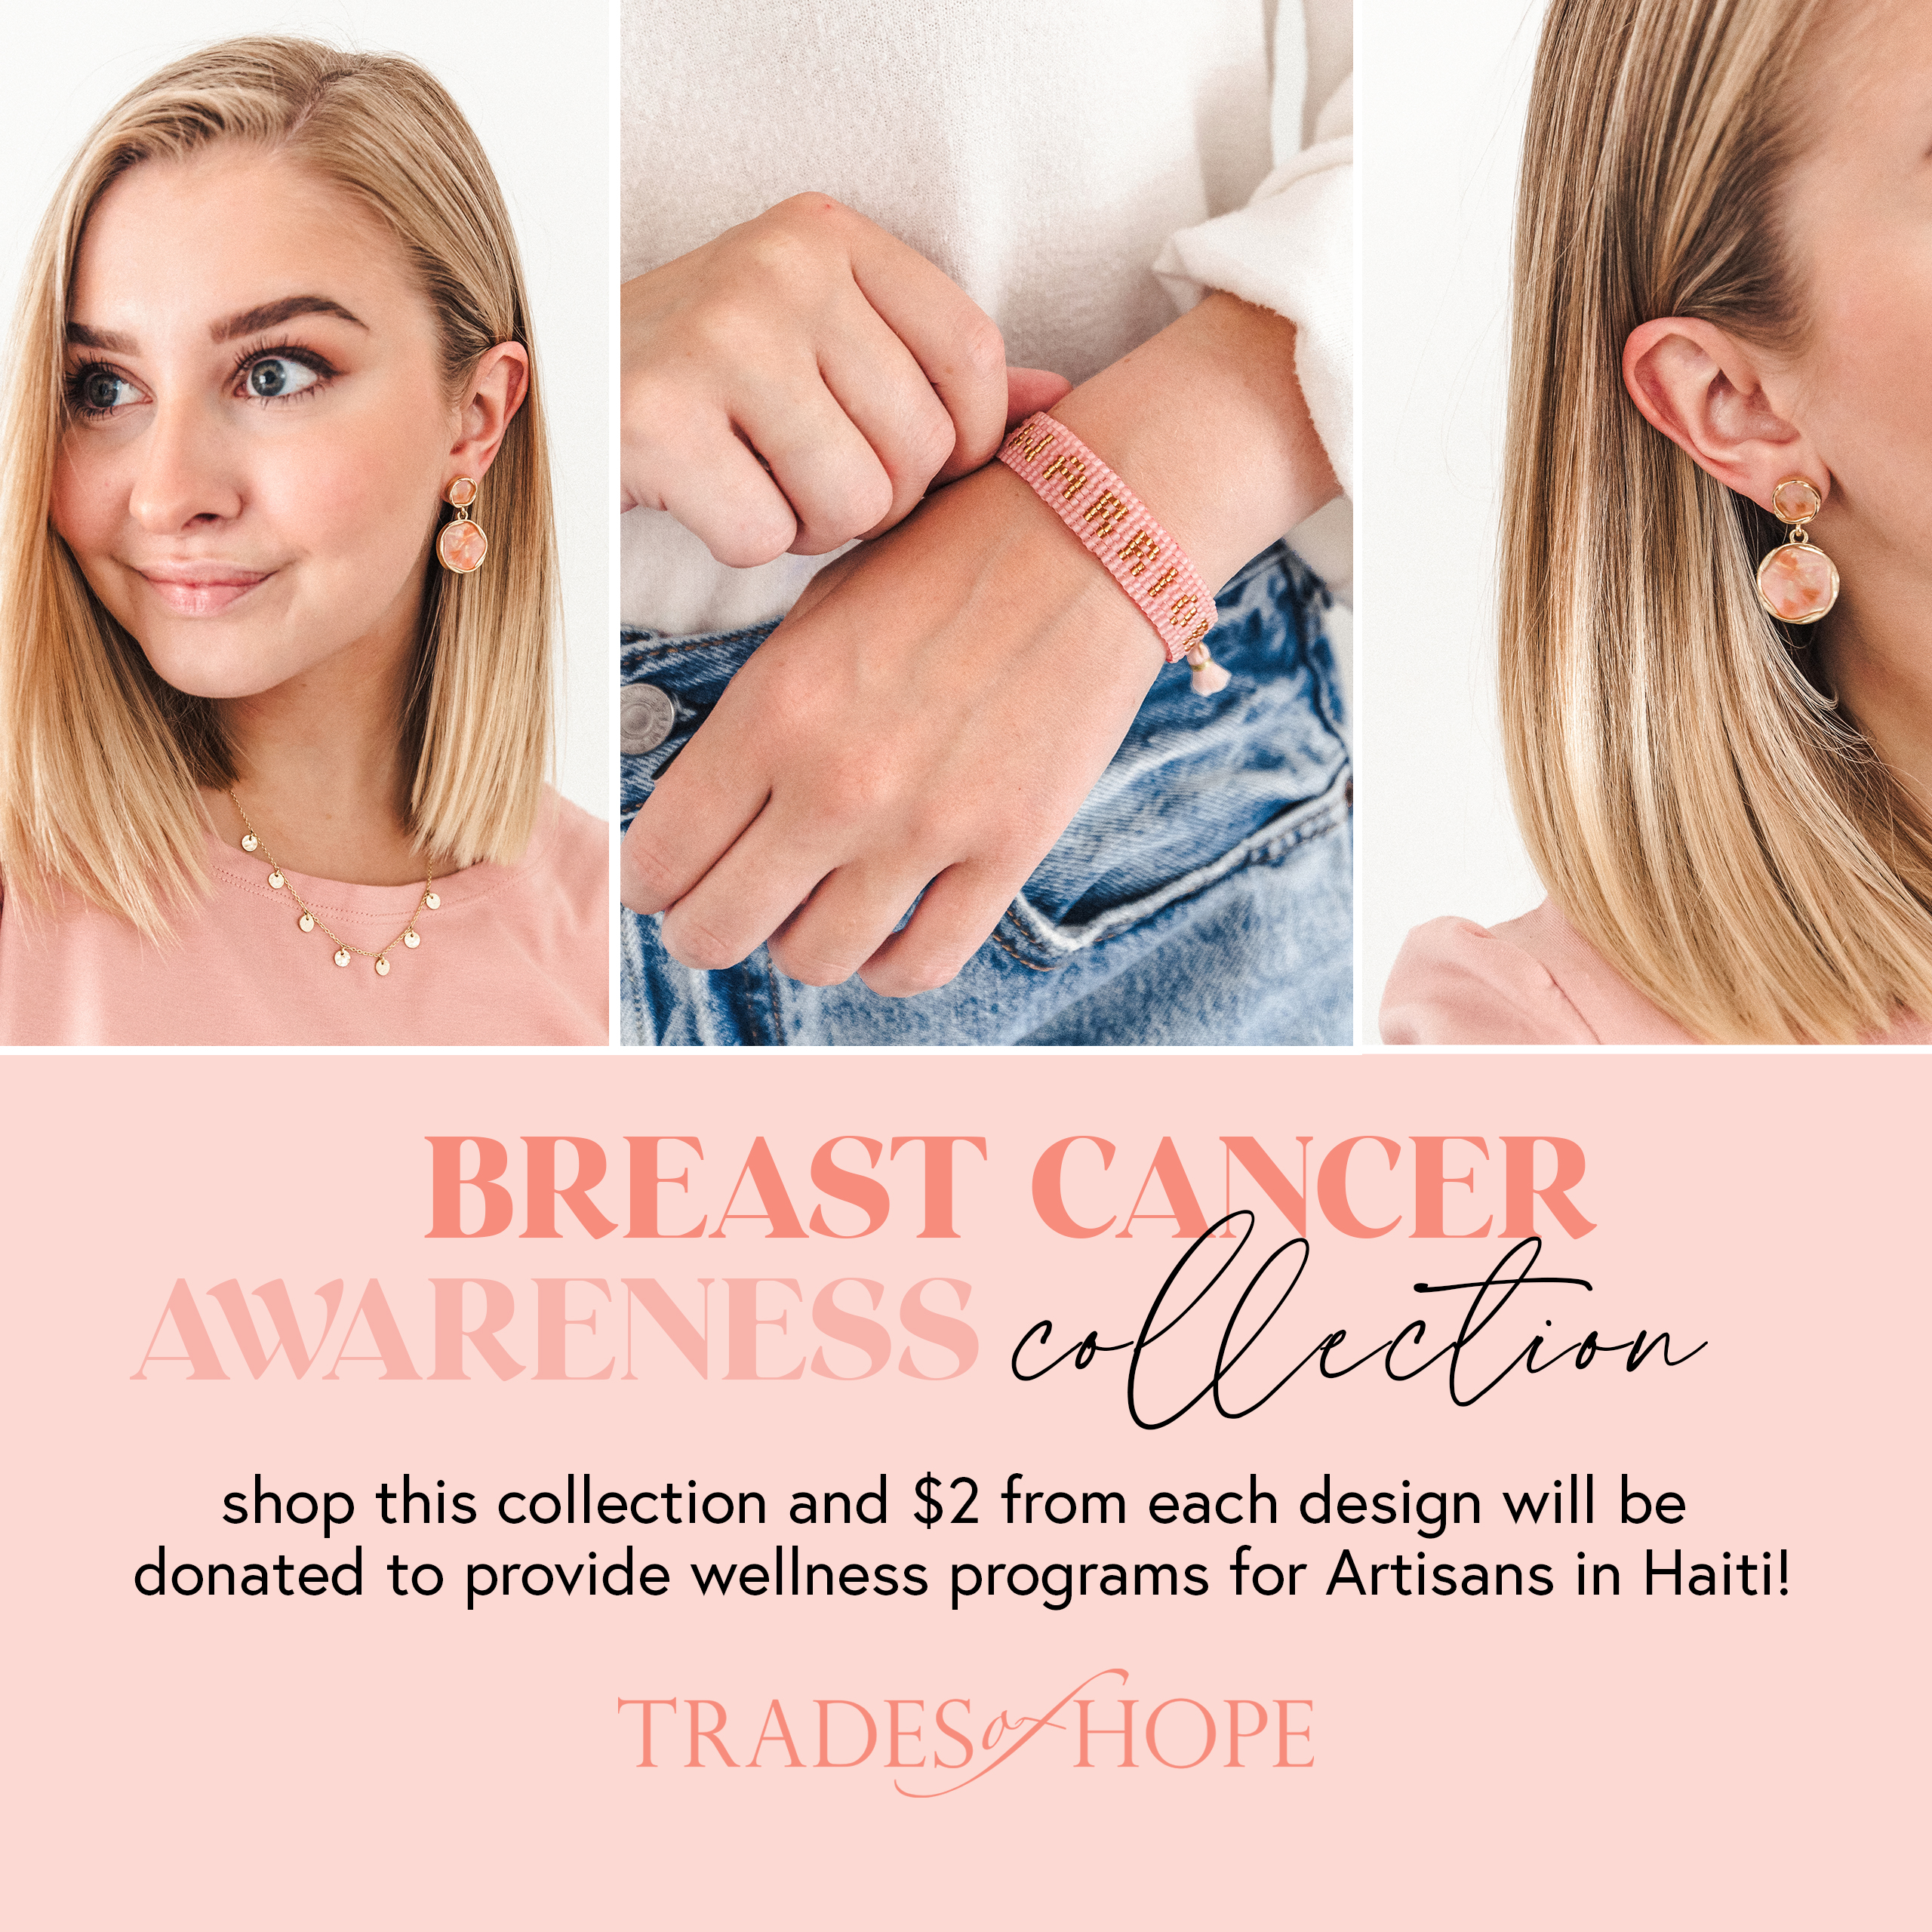 Starting TODAY!!!! Double Qualifying Volume on Breast Cancer Awareness items!